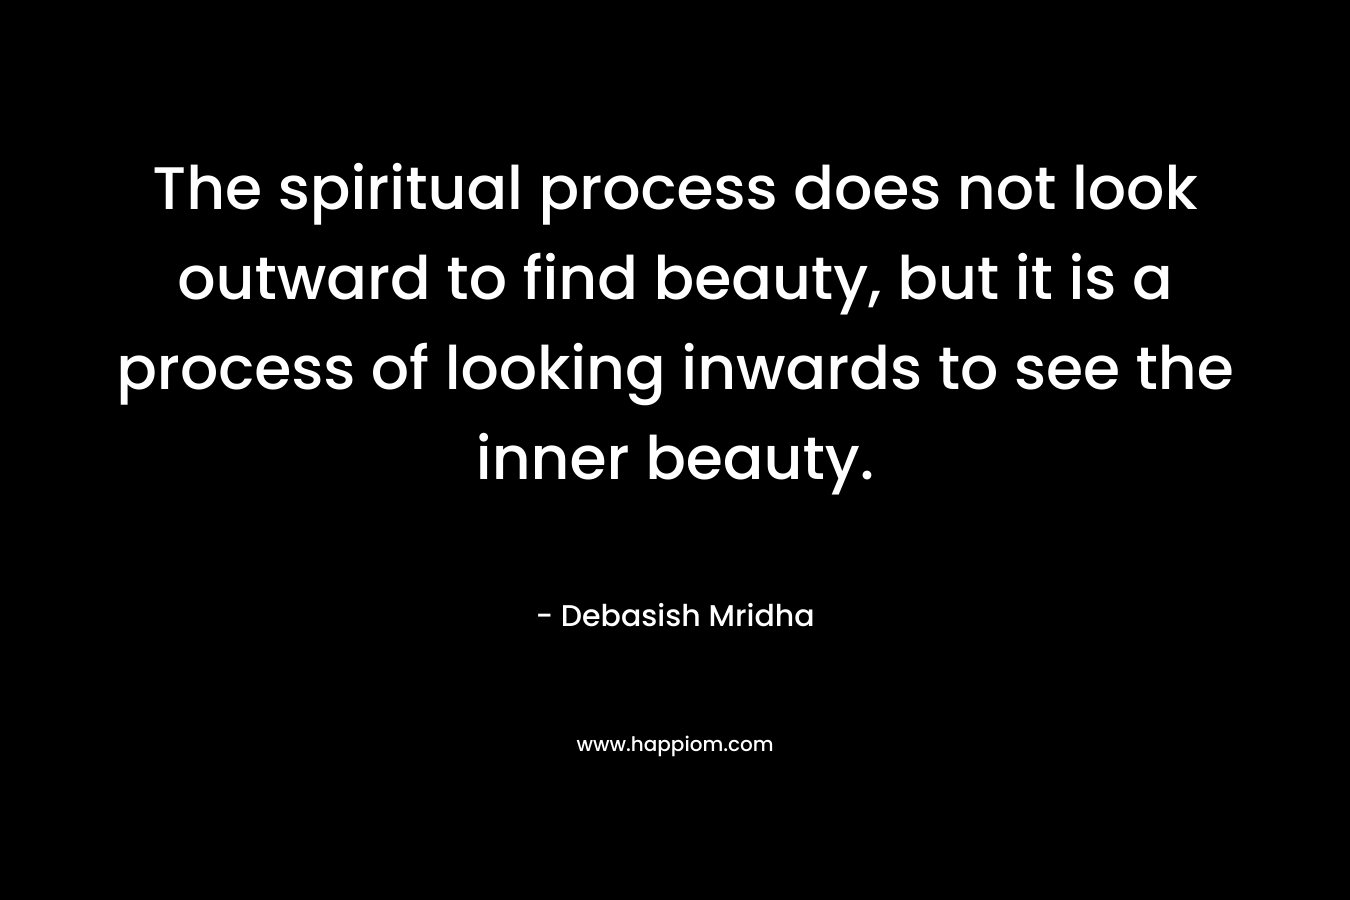 The spiritual process does not look outward to find beauty, but it is a process of looking inwards to see the inner beauty.